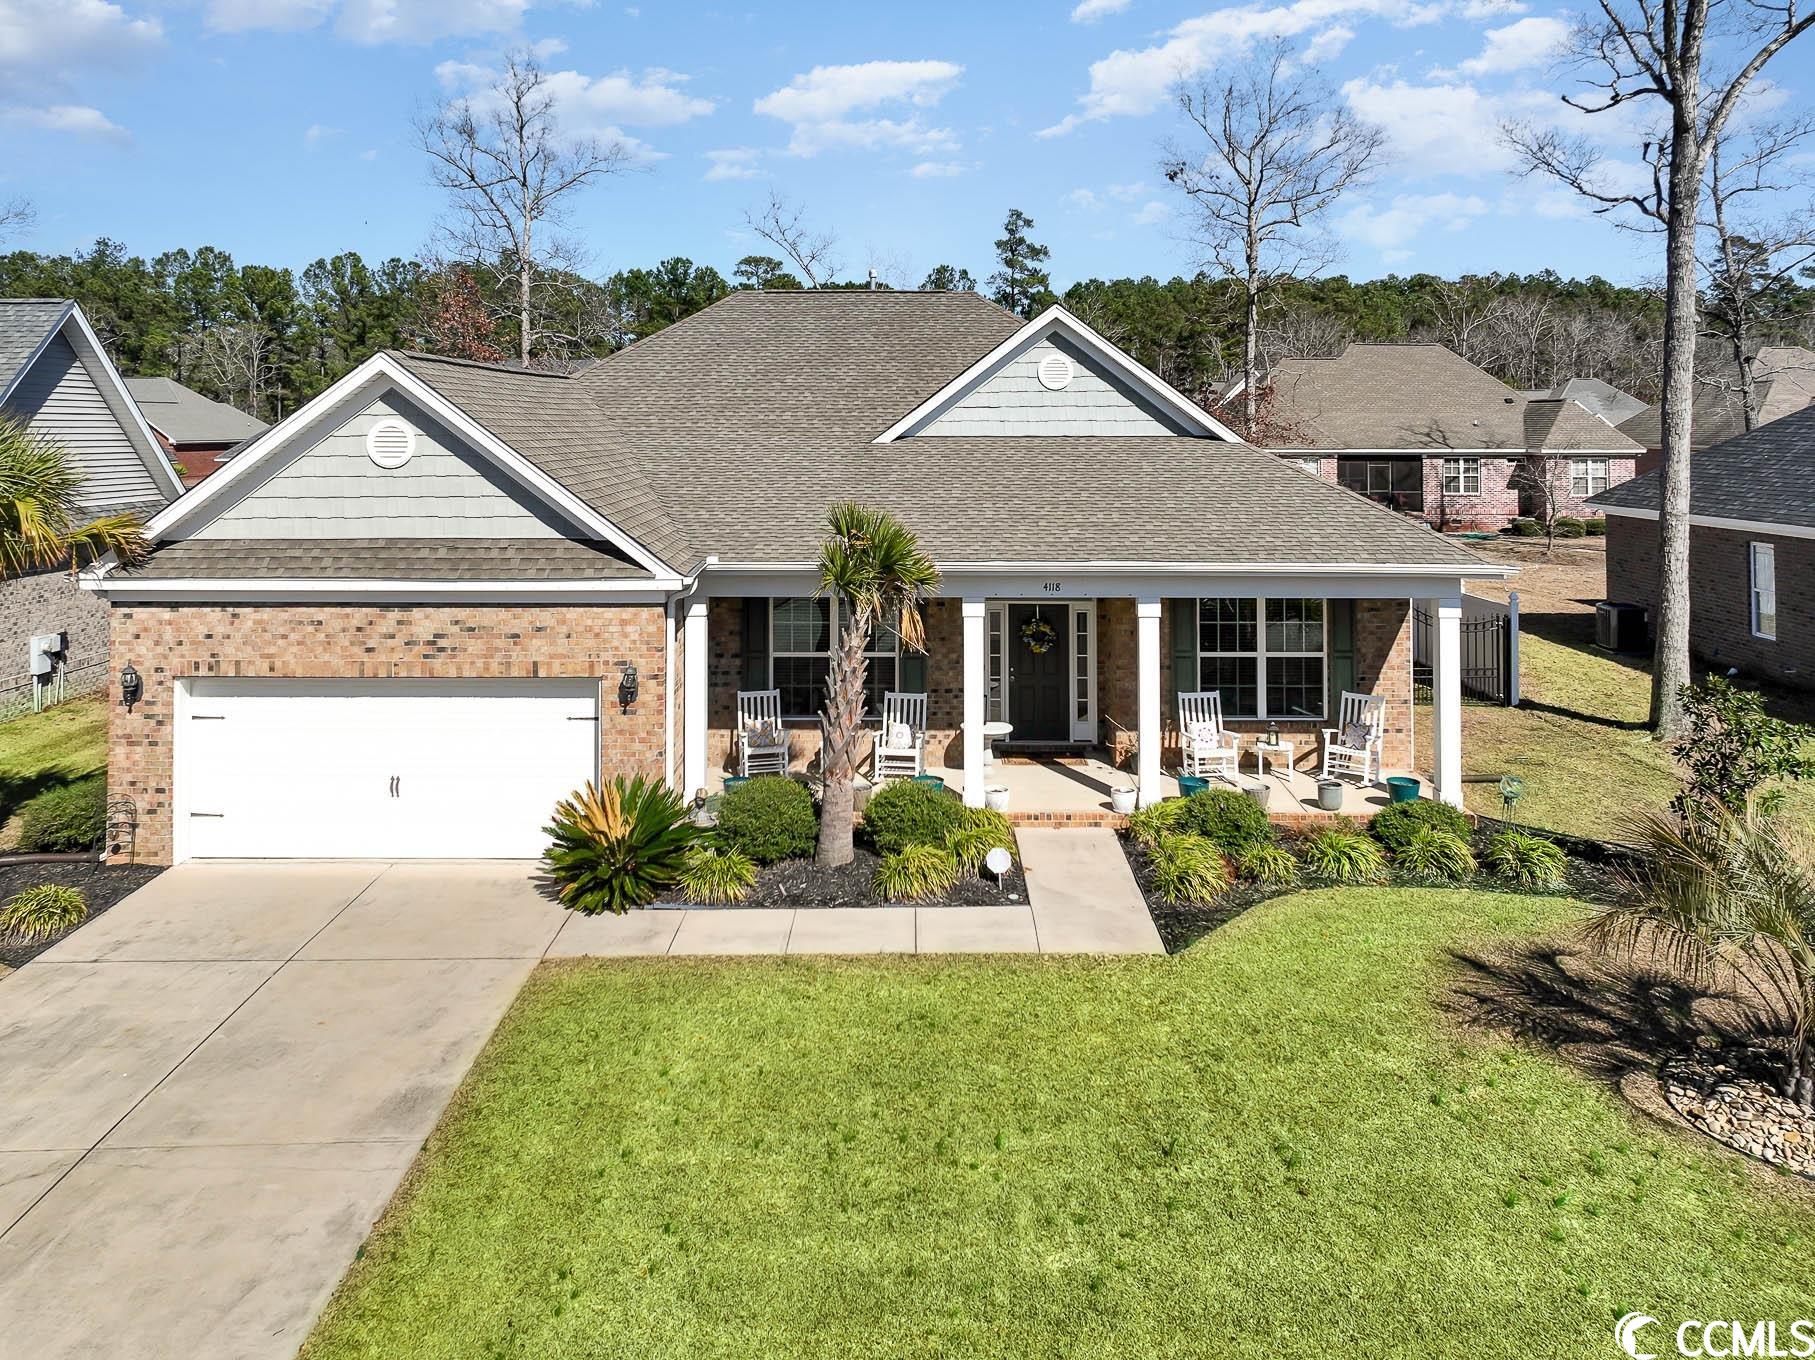 4118 Tiffany Dr. Florence, SC 29501